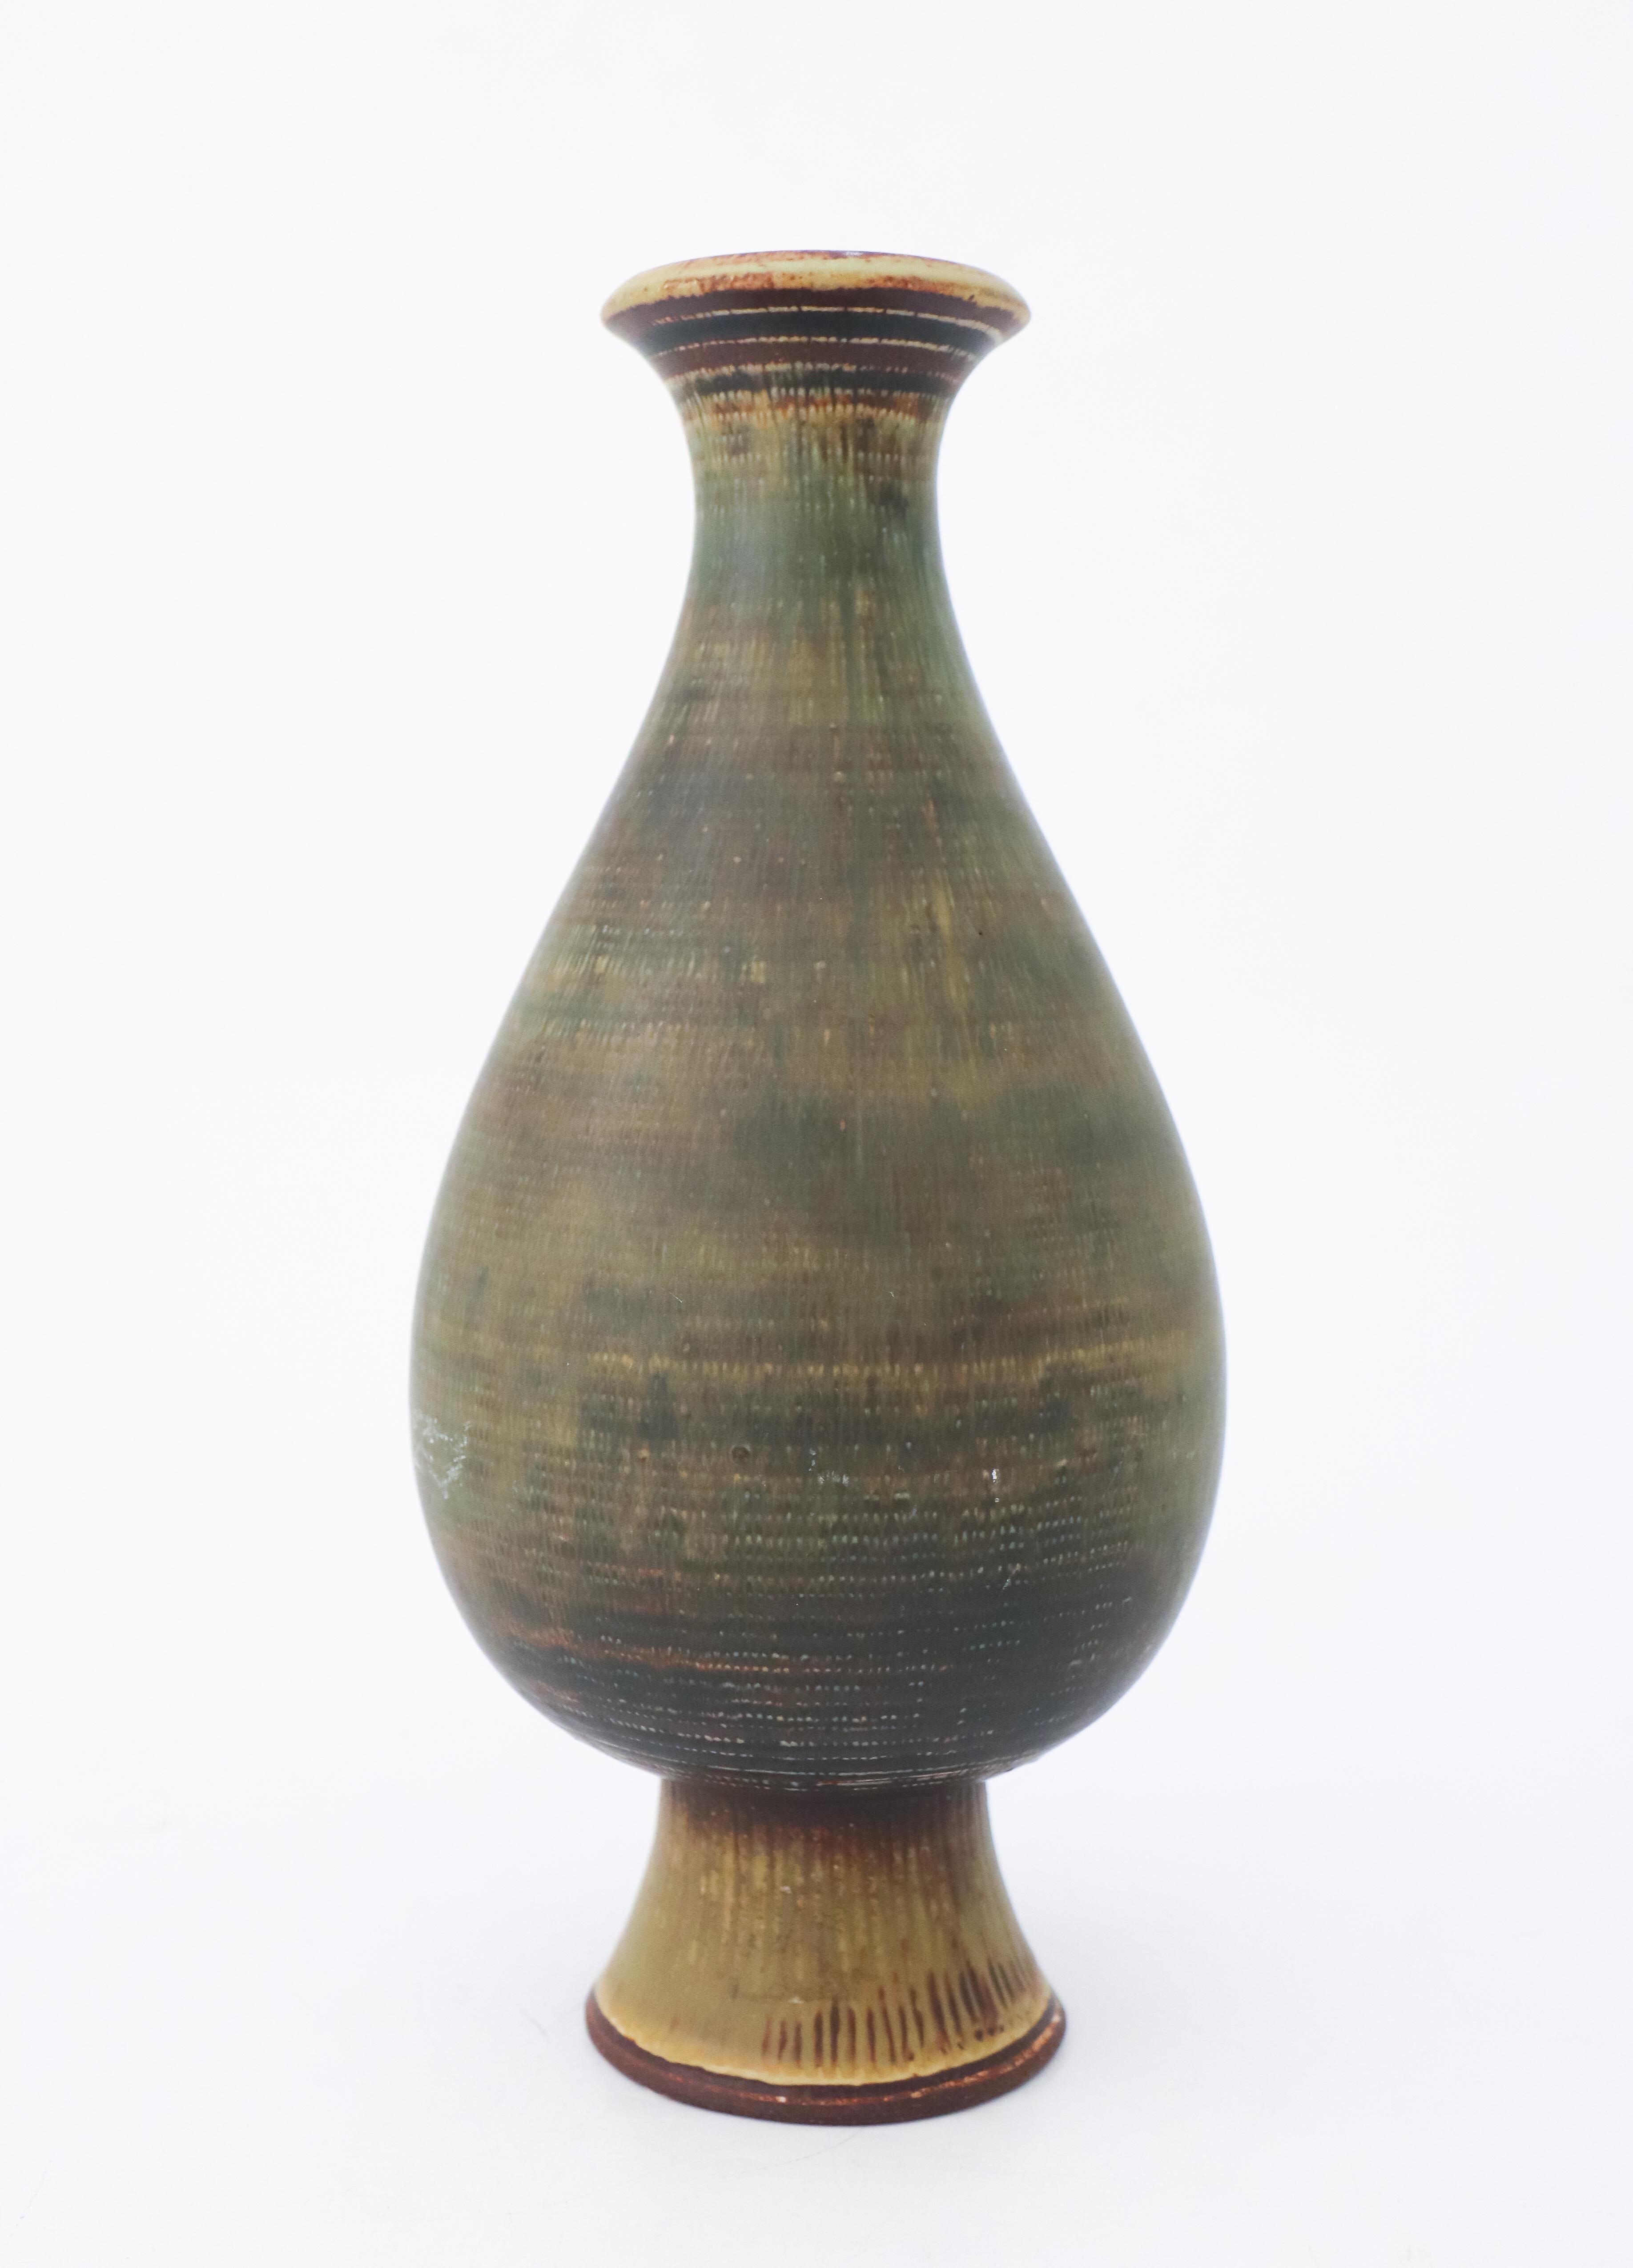 A lovely, large vase of model Farsta designed by Wilhelm Kåge at Gustavsberg. It is 28,5 cm high and in excellent condition except from some minor scratching marks as the photos.